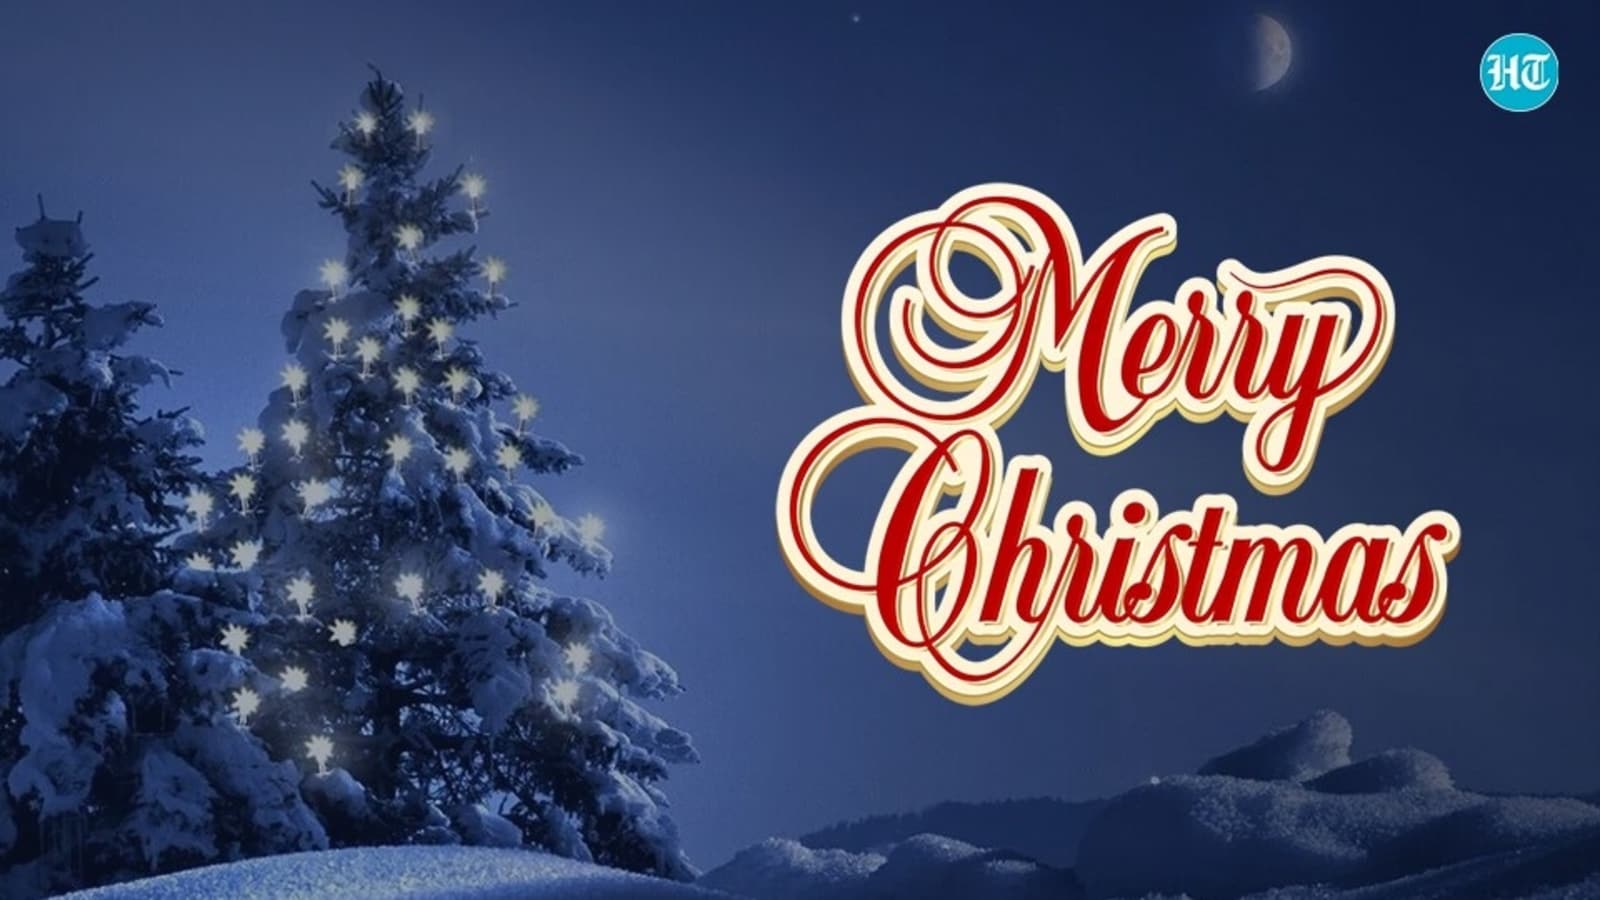 Merry Christmas Best Wishes Image Messages Greetings To